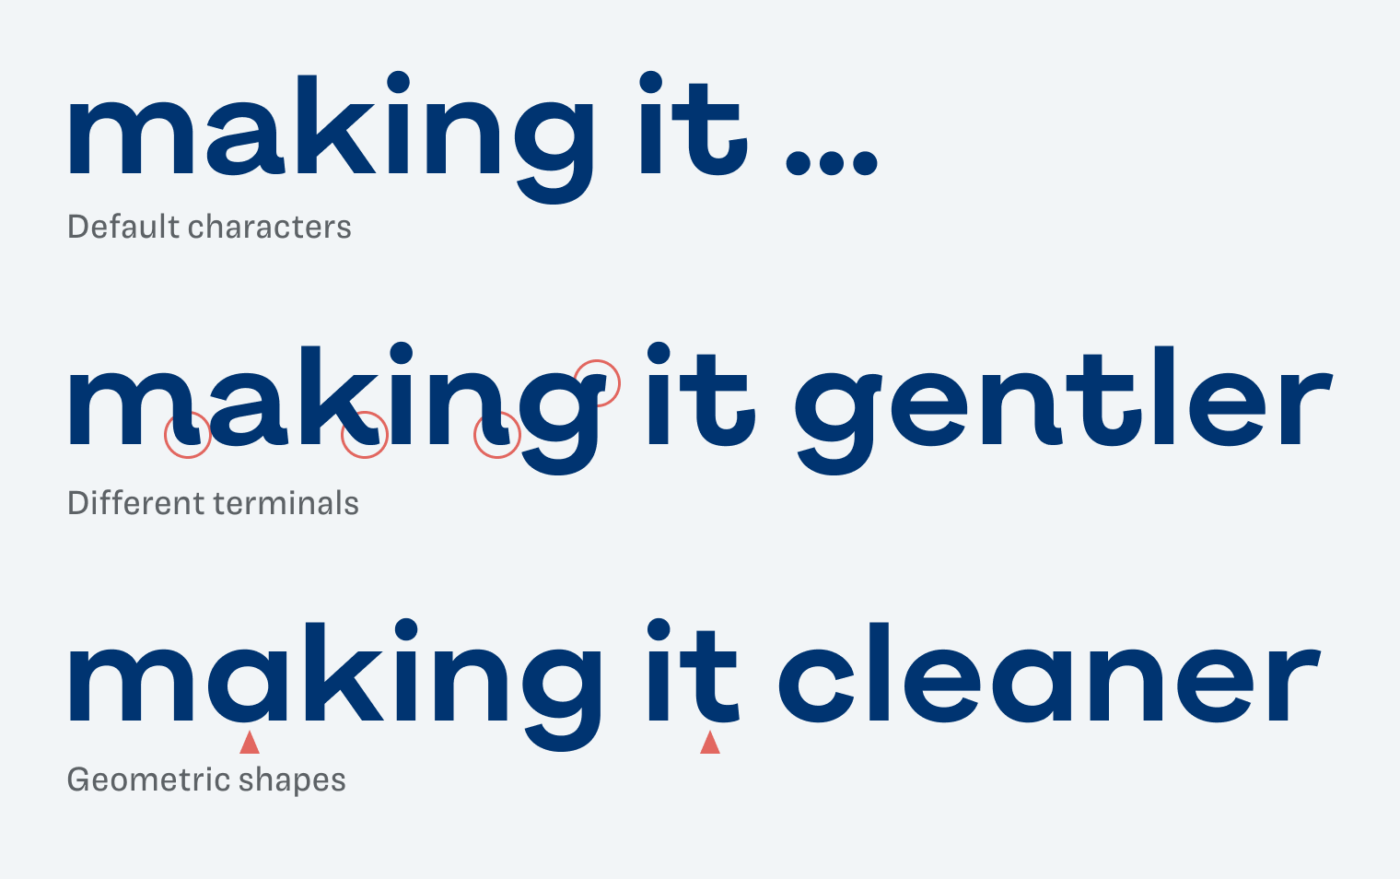 making it … gentler by activating different terminals or more geometric by activating geometric shapes that show a single story “a” and a shorter, simpler “t”.